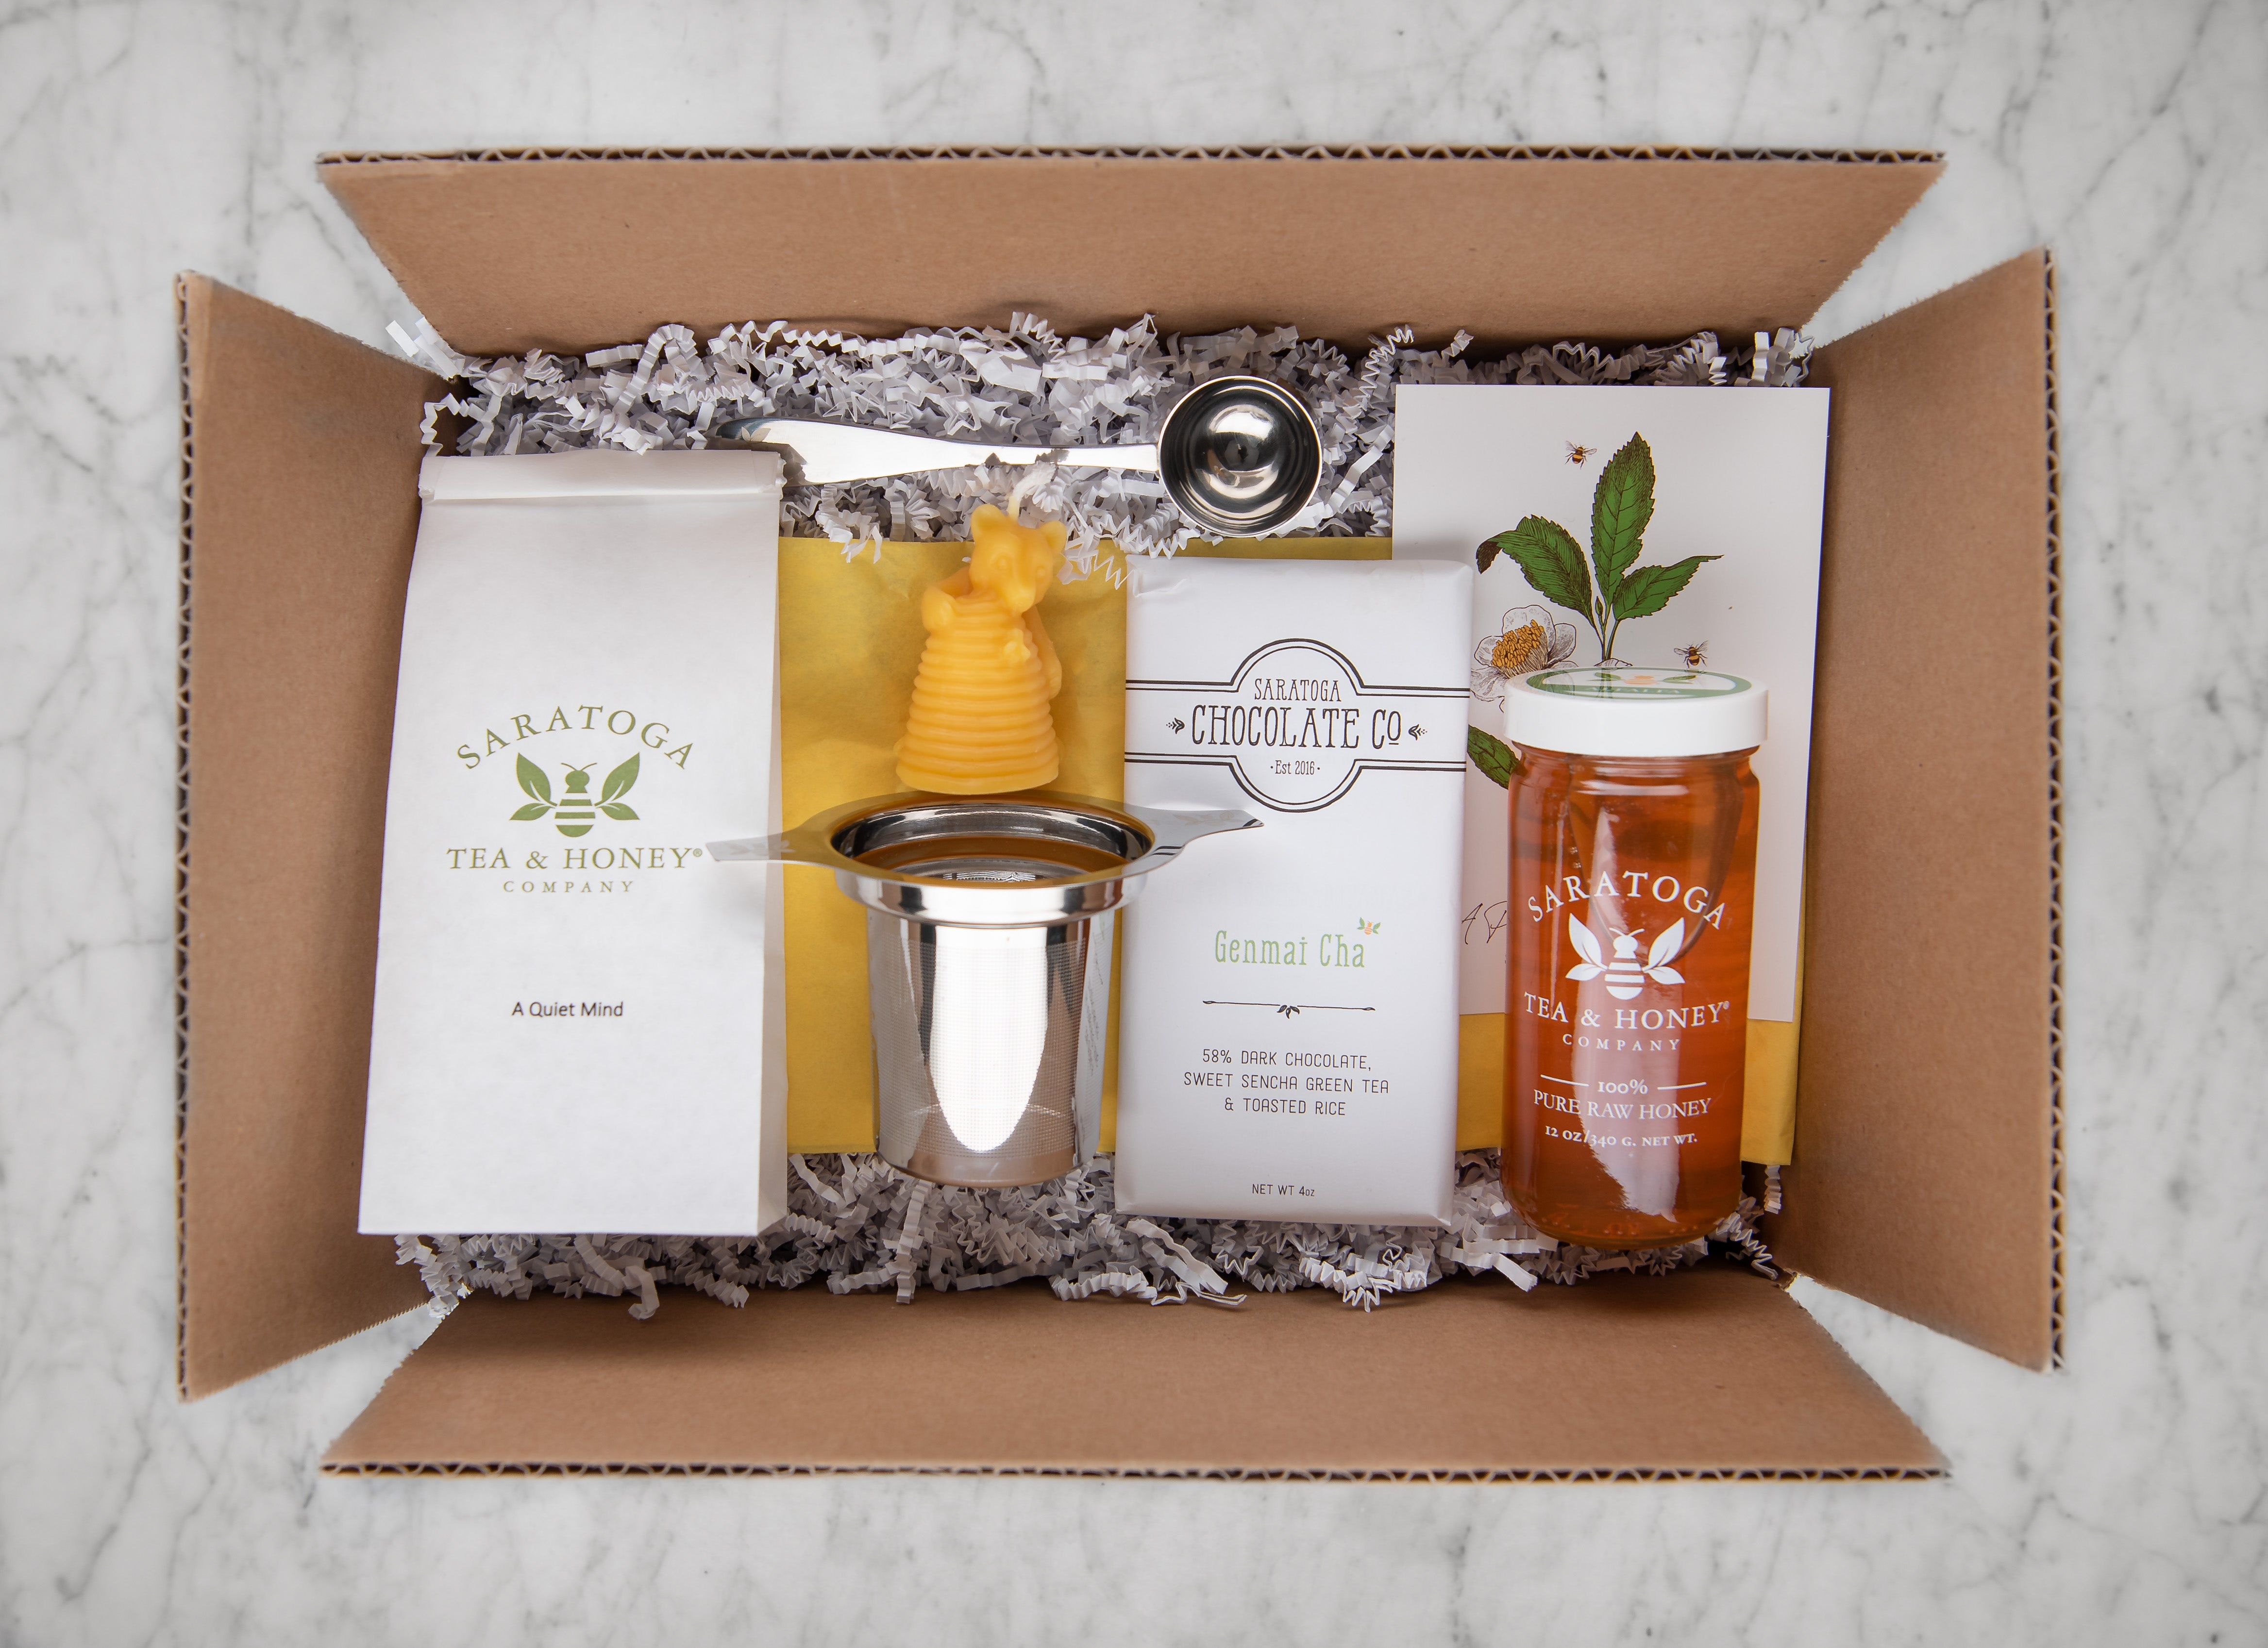 It's a... New Bee! Welcome Baby Tea Gift Set Gifts for New Parents – Saratoga Tea & Honey Co.